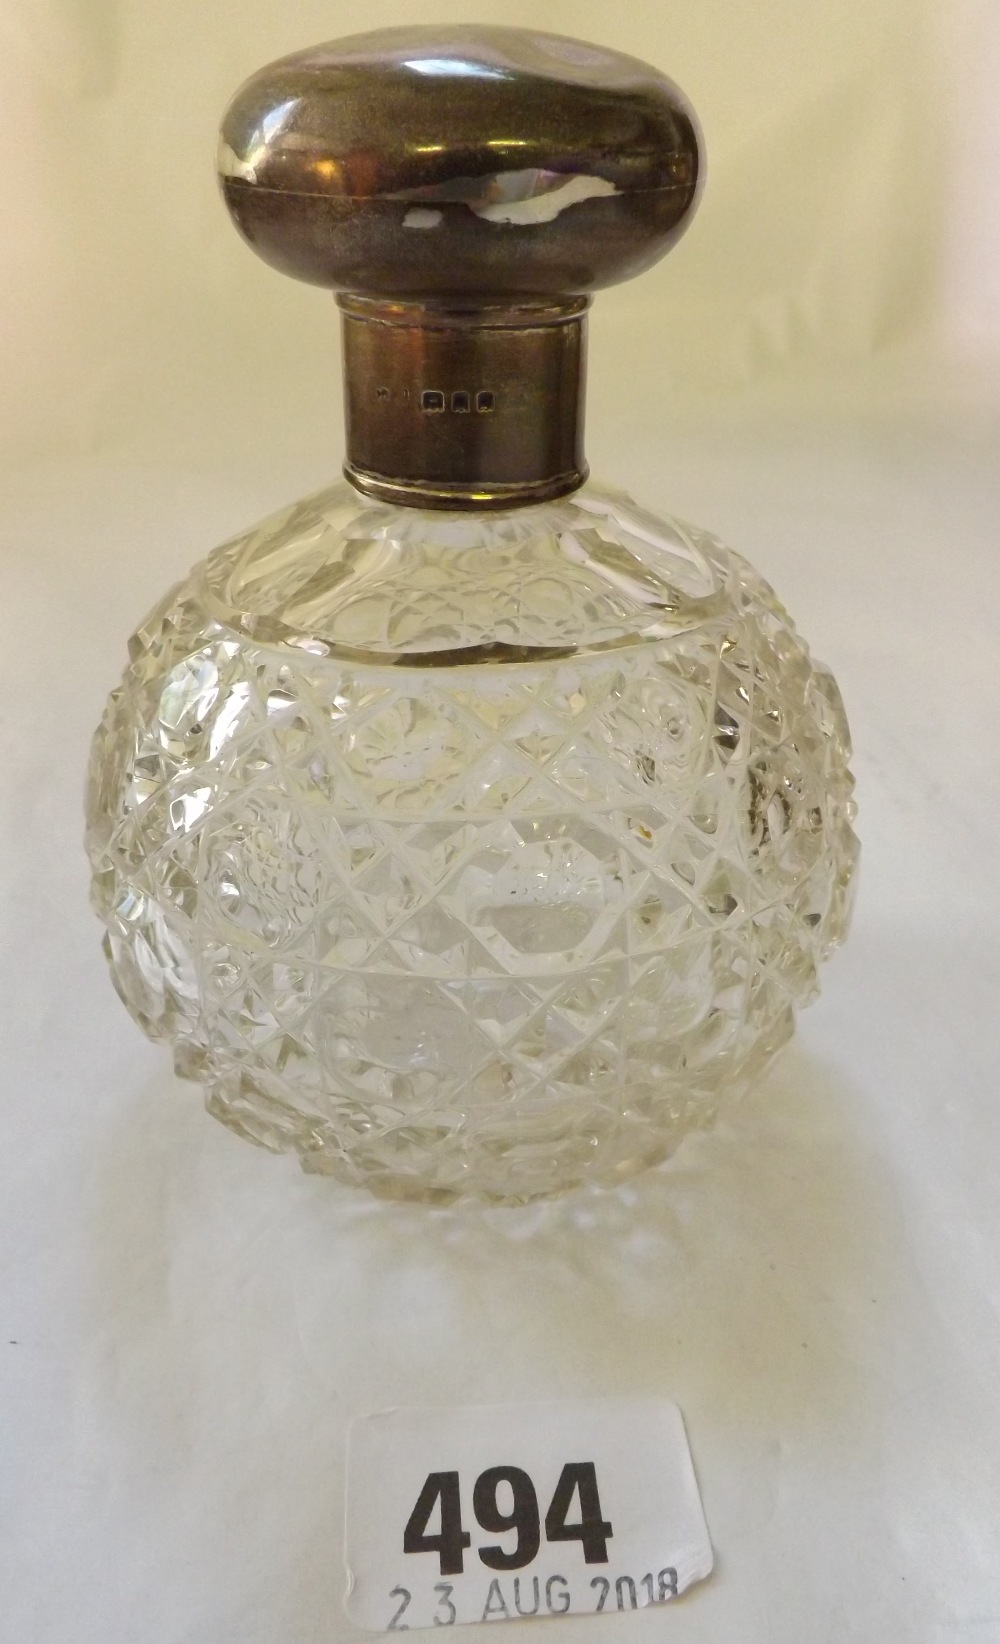 Circular scent bottle with cut glass body London 1930?